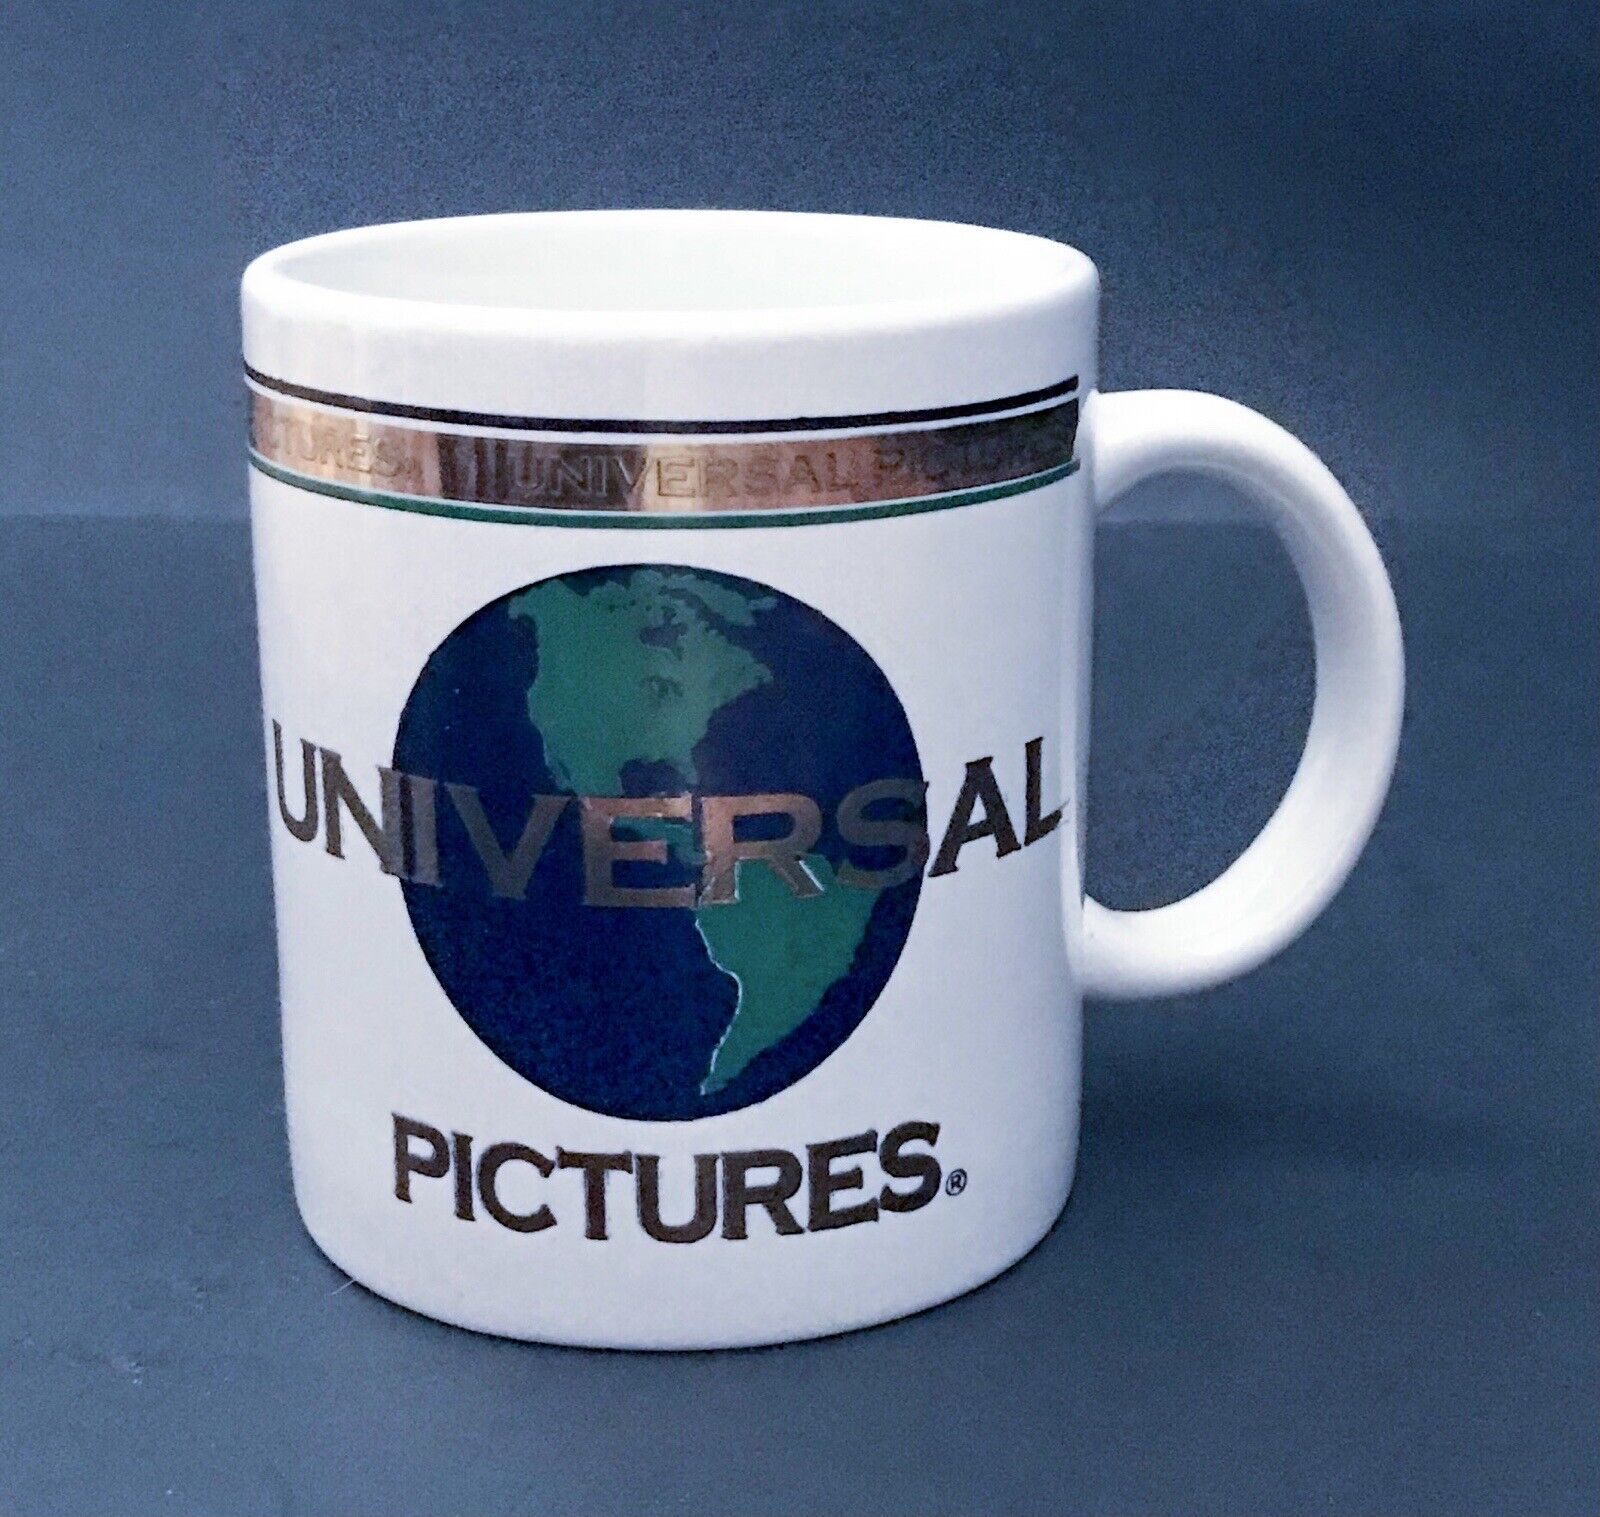 Vintage Universal Pictures White Mug Coffee Cup Golden Letters Earth Image 